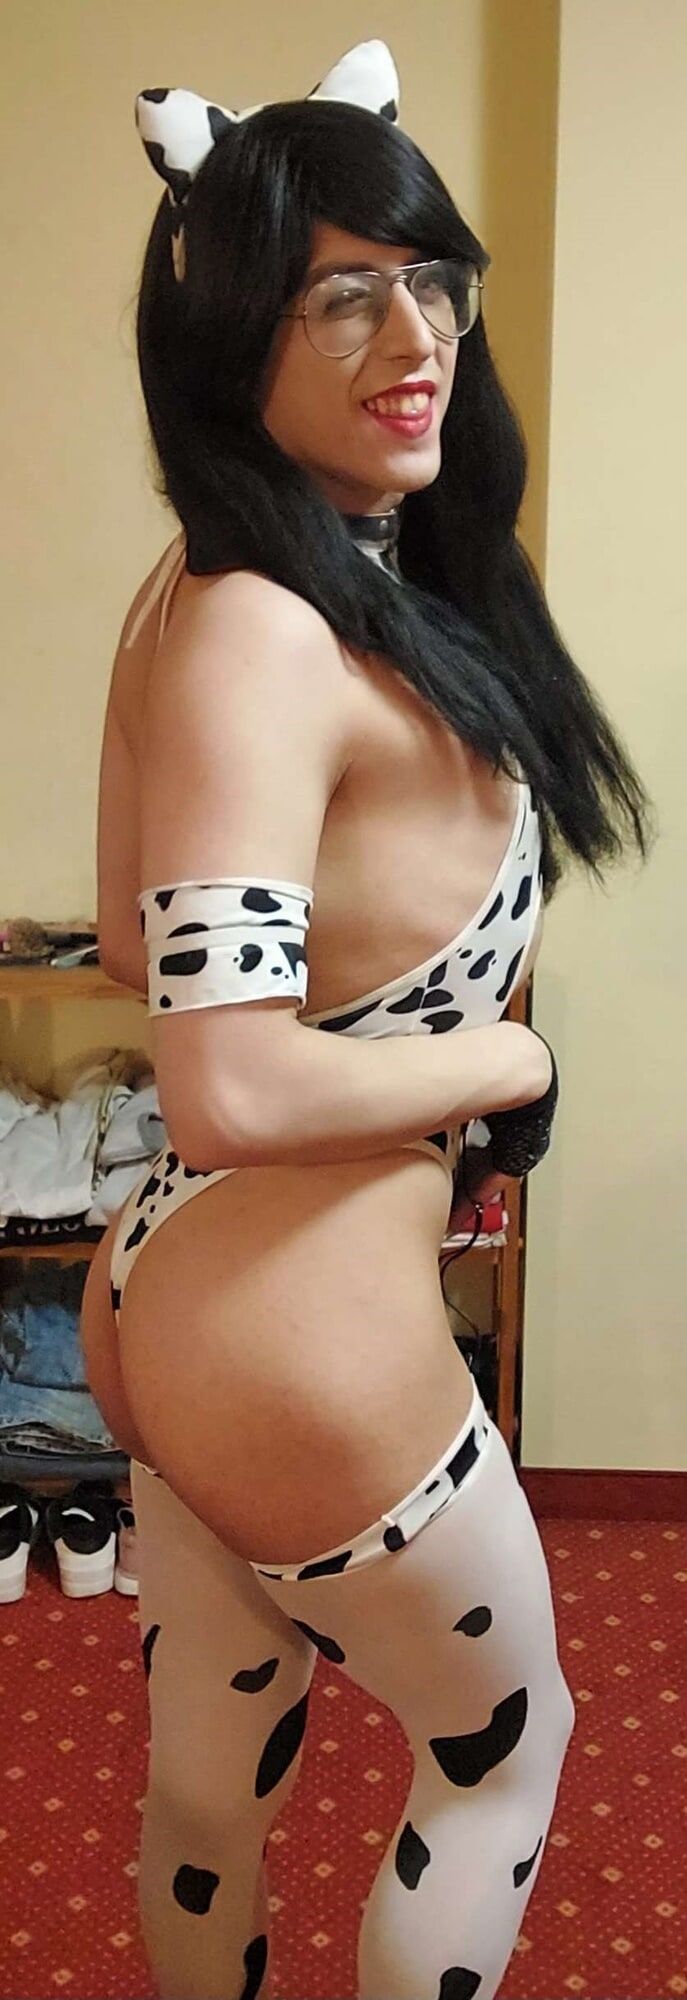 Me in My Cow Outfit